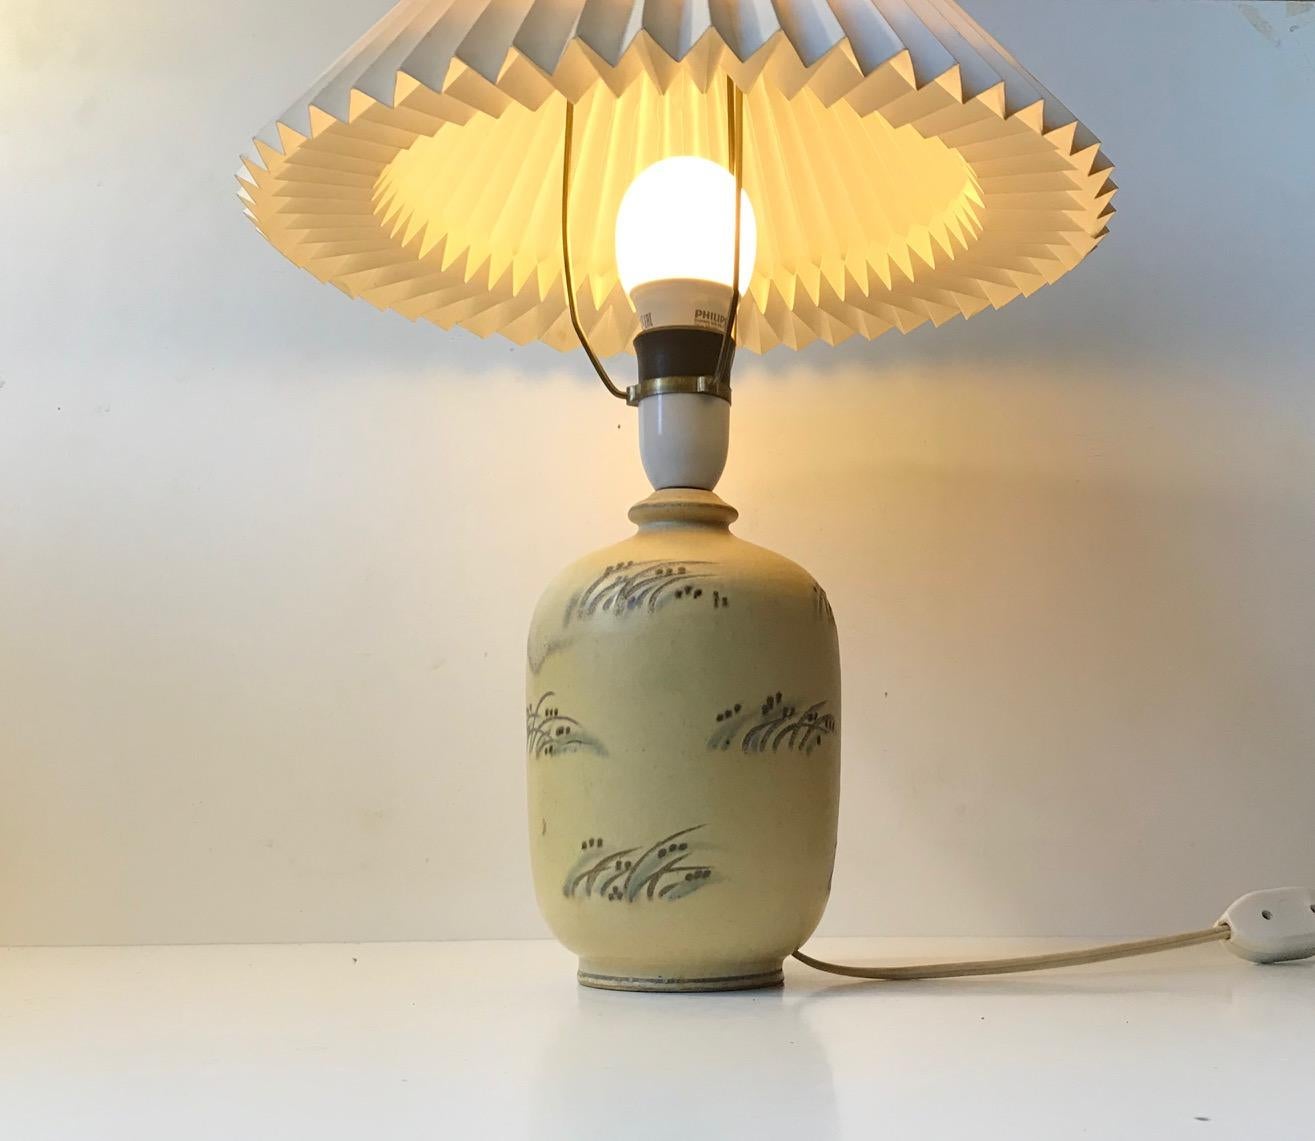 Gourd shaped earthenware table light designed and manufactured by Knabstrup in Denmark during the 1930s. Hand decorated with sea weeds on dusty pastels and earthy colors. The table lamp comes without a shade. Please personalize by picking your own.